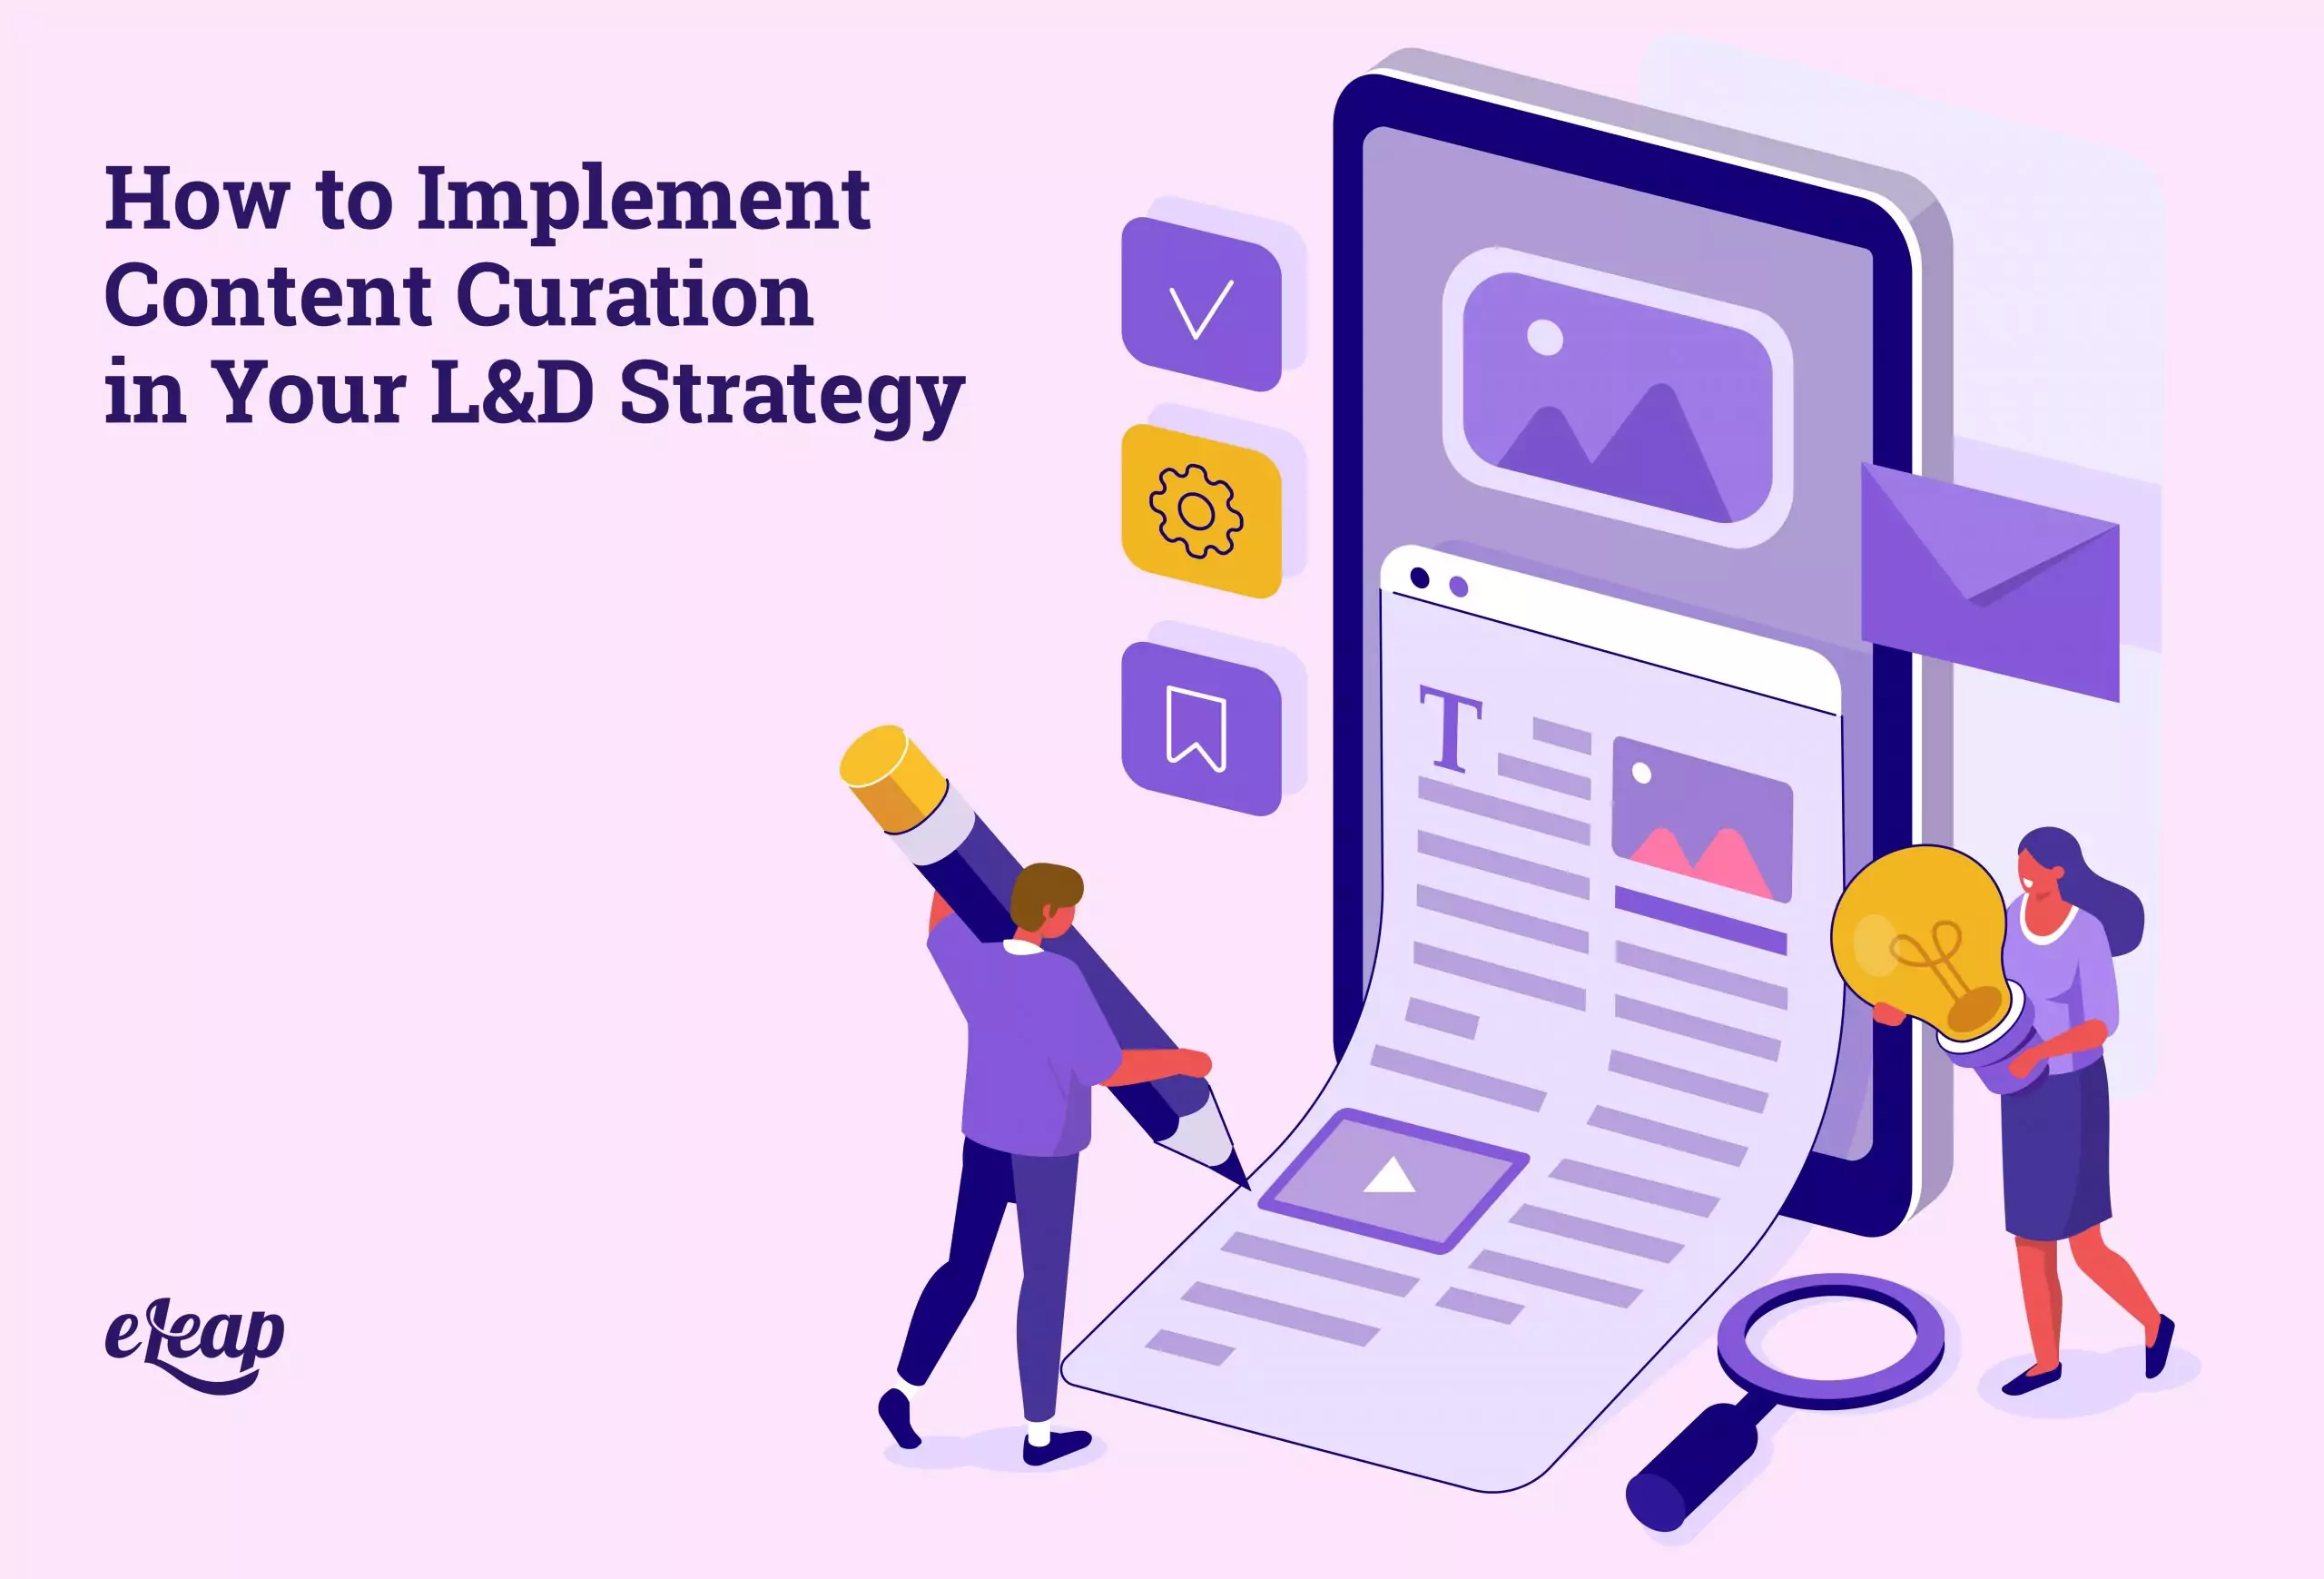 How to Implement Content Curation in Your L&D Strategy